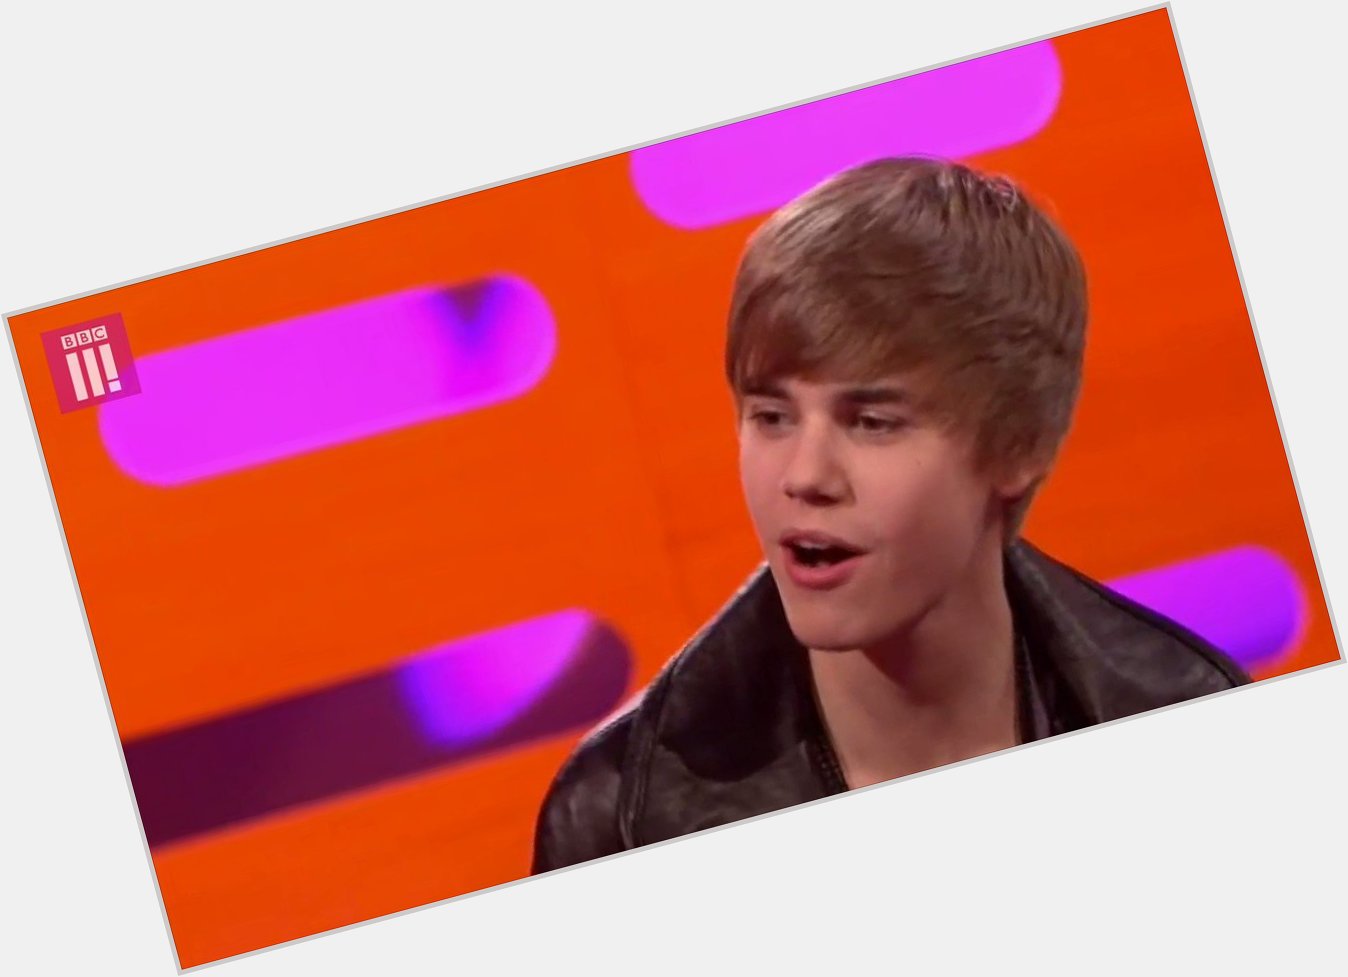 Happy birthday, Justin Bieber.

We still think about your sexy British accent from 2010. 